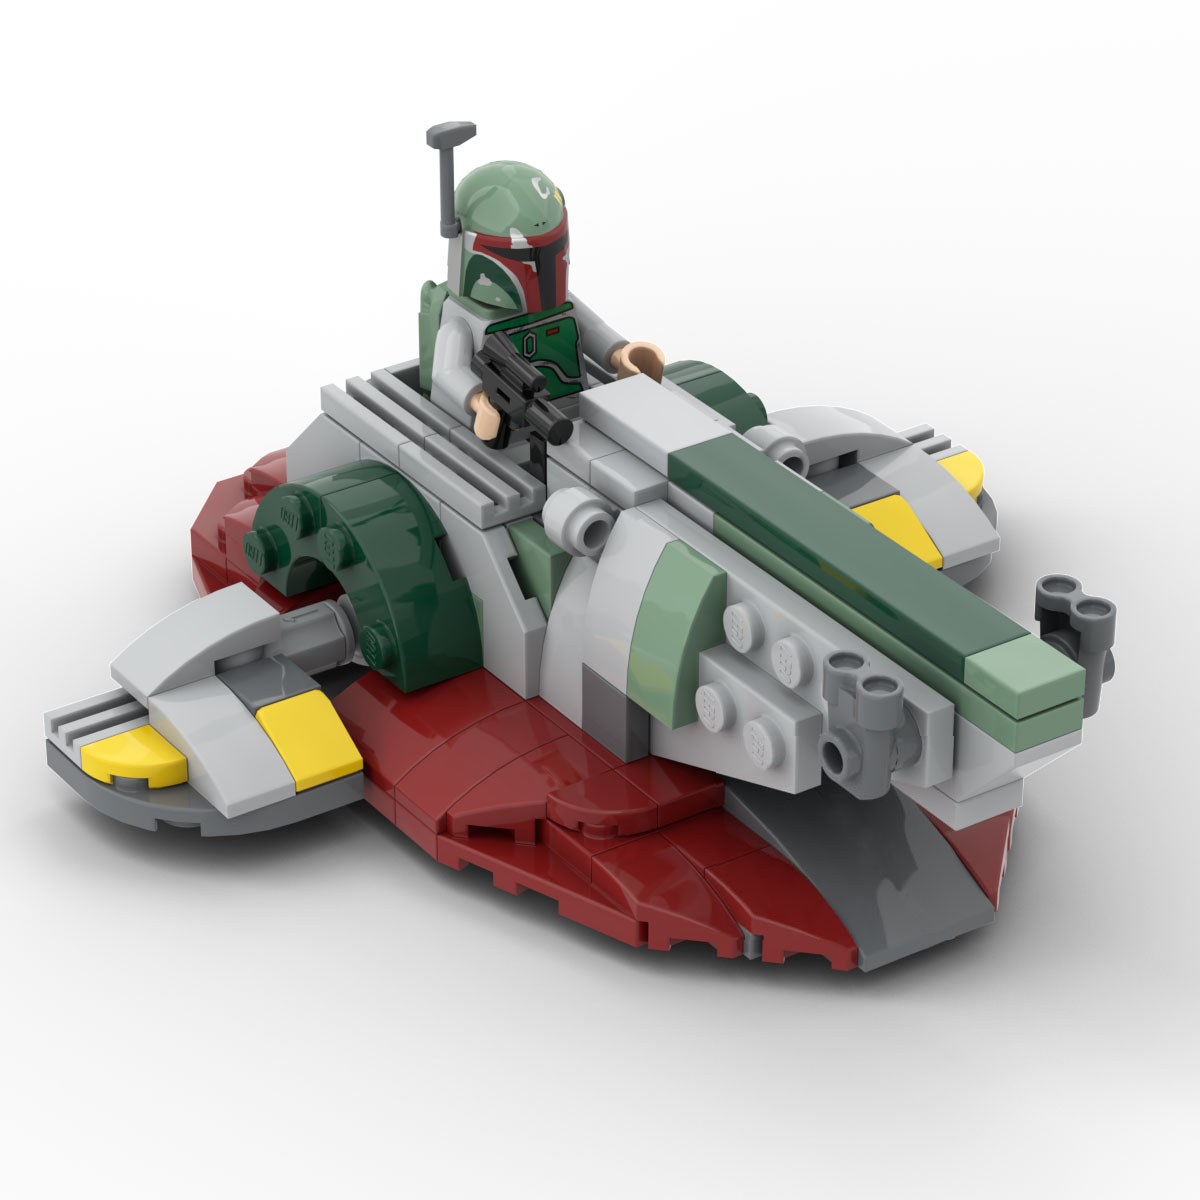 Lego Star Slave 1 Microfighter - Instructions